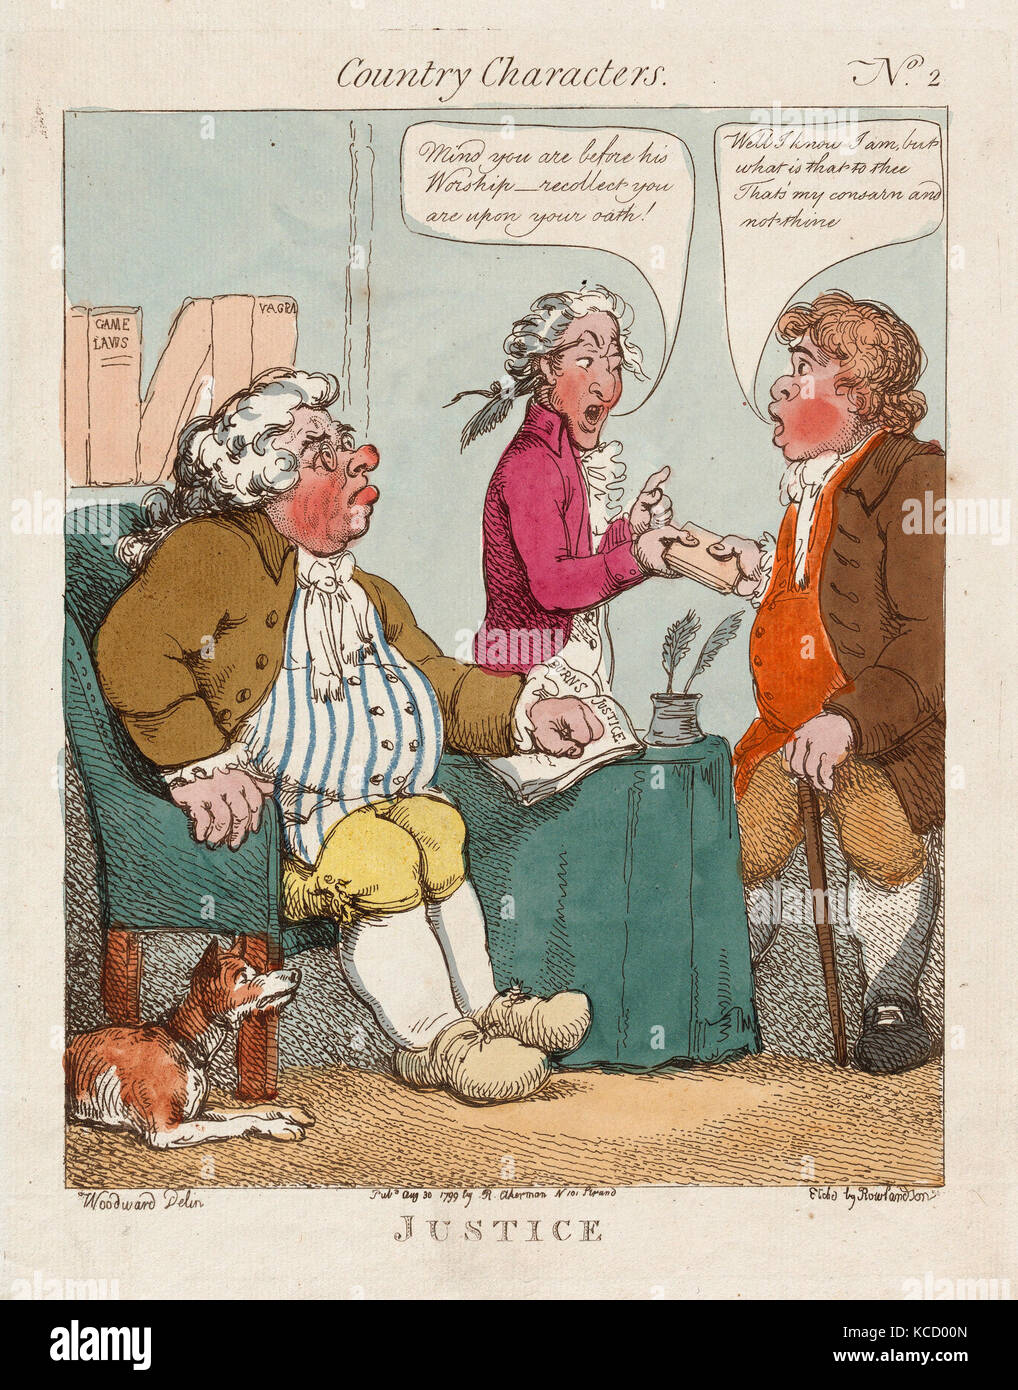 Drawings and Prints, Print, Justice, Country Characters, Artist, Publisher, Artist, After, Thomas Rowlandson, Rudolph Ackermann Stock Photo